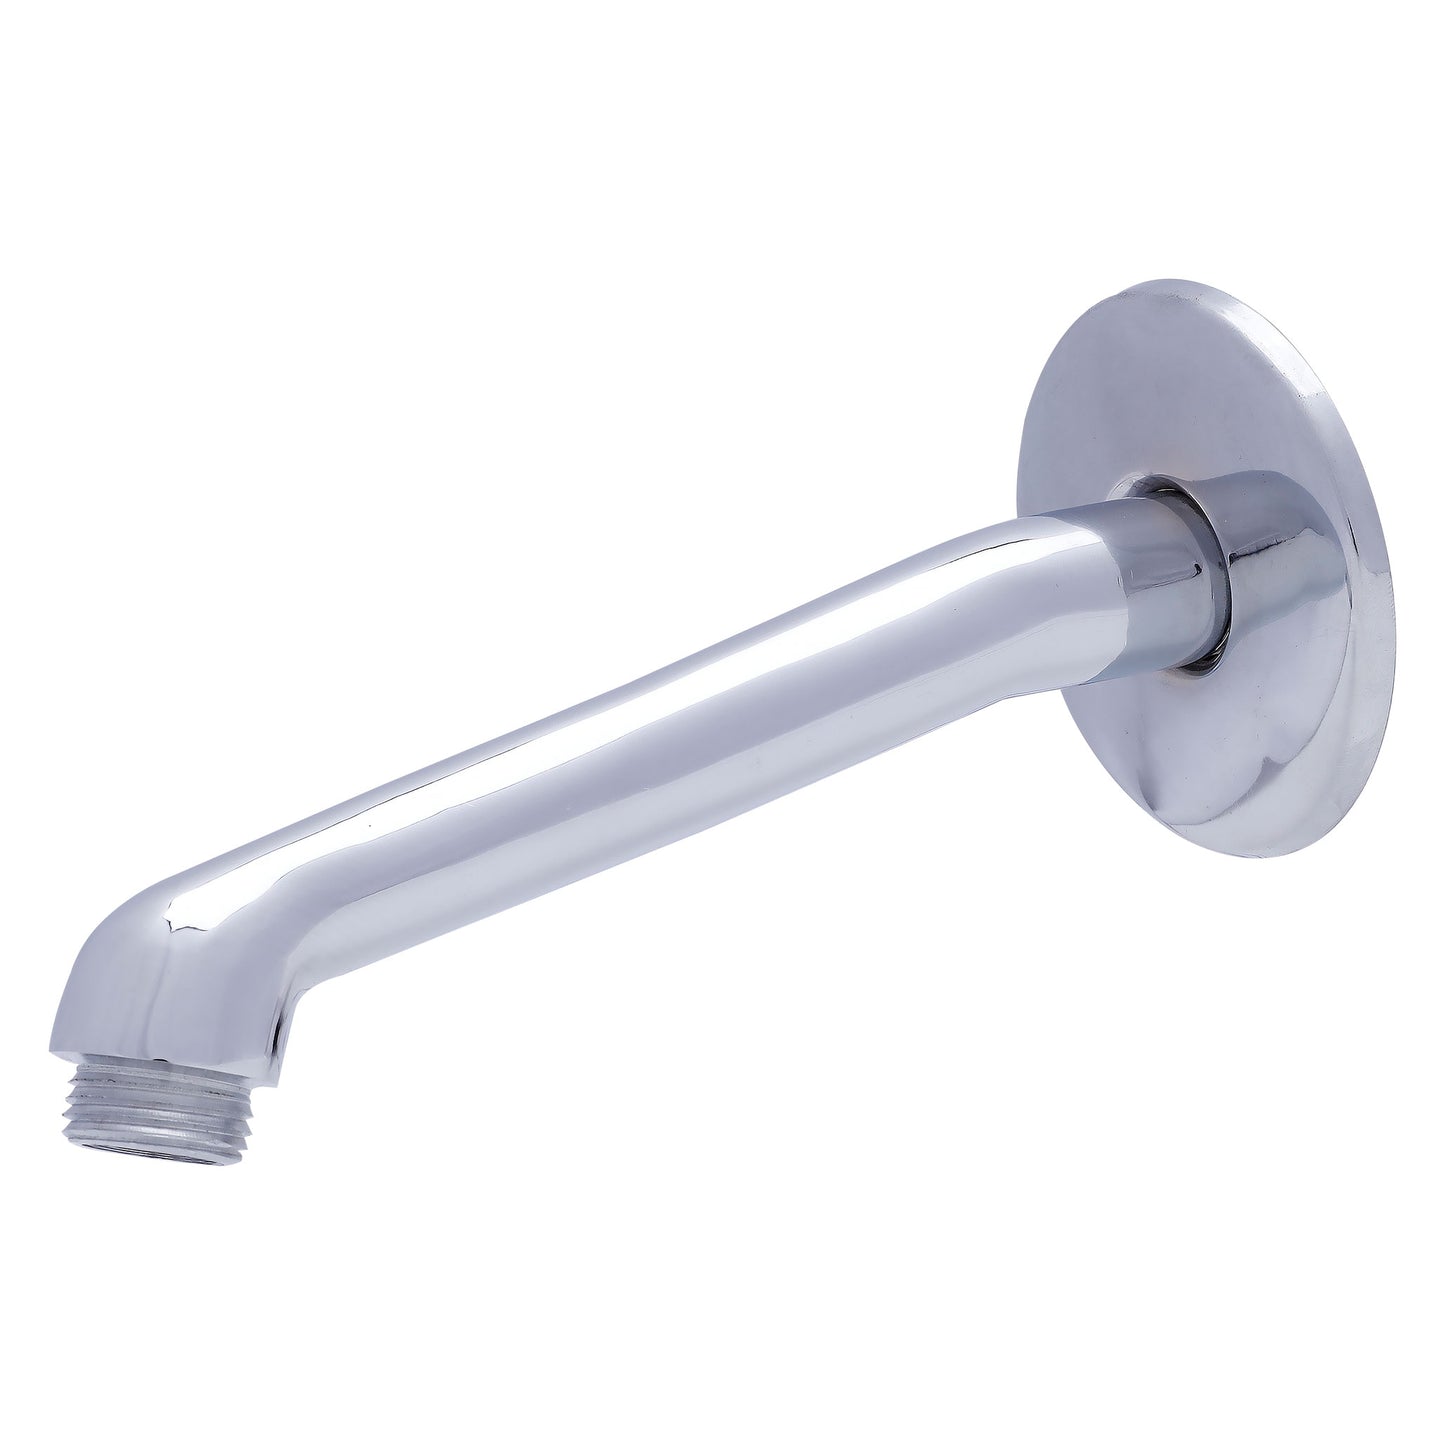 SSA-01 Overhead Shower with Shower arm and flange